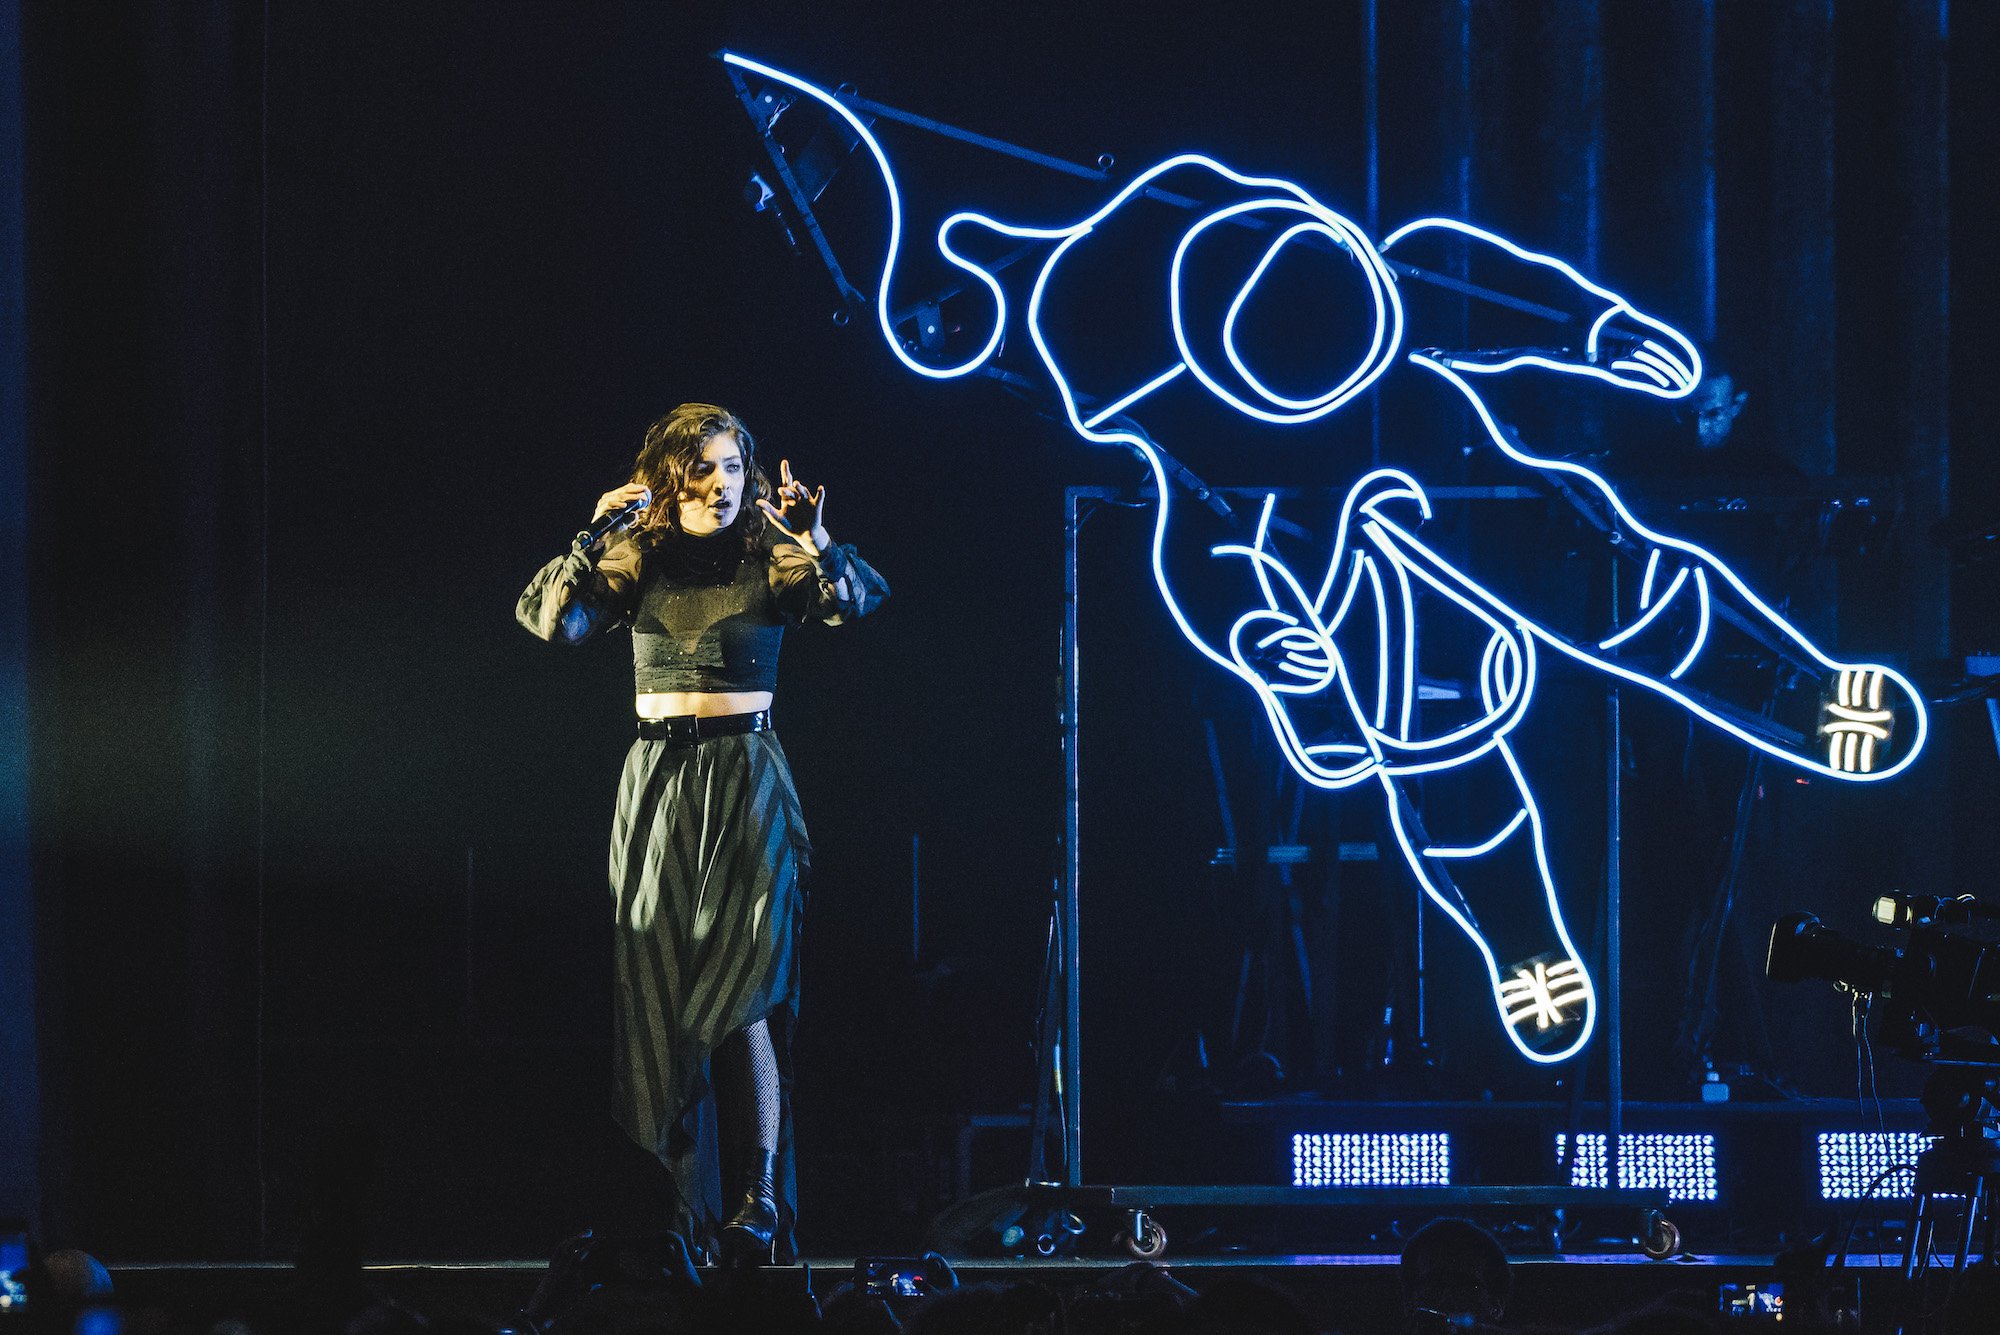 Lorde performing on stage in front of a neon hand-shaped light sculpture